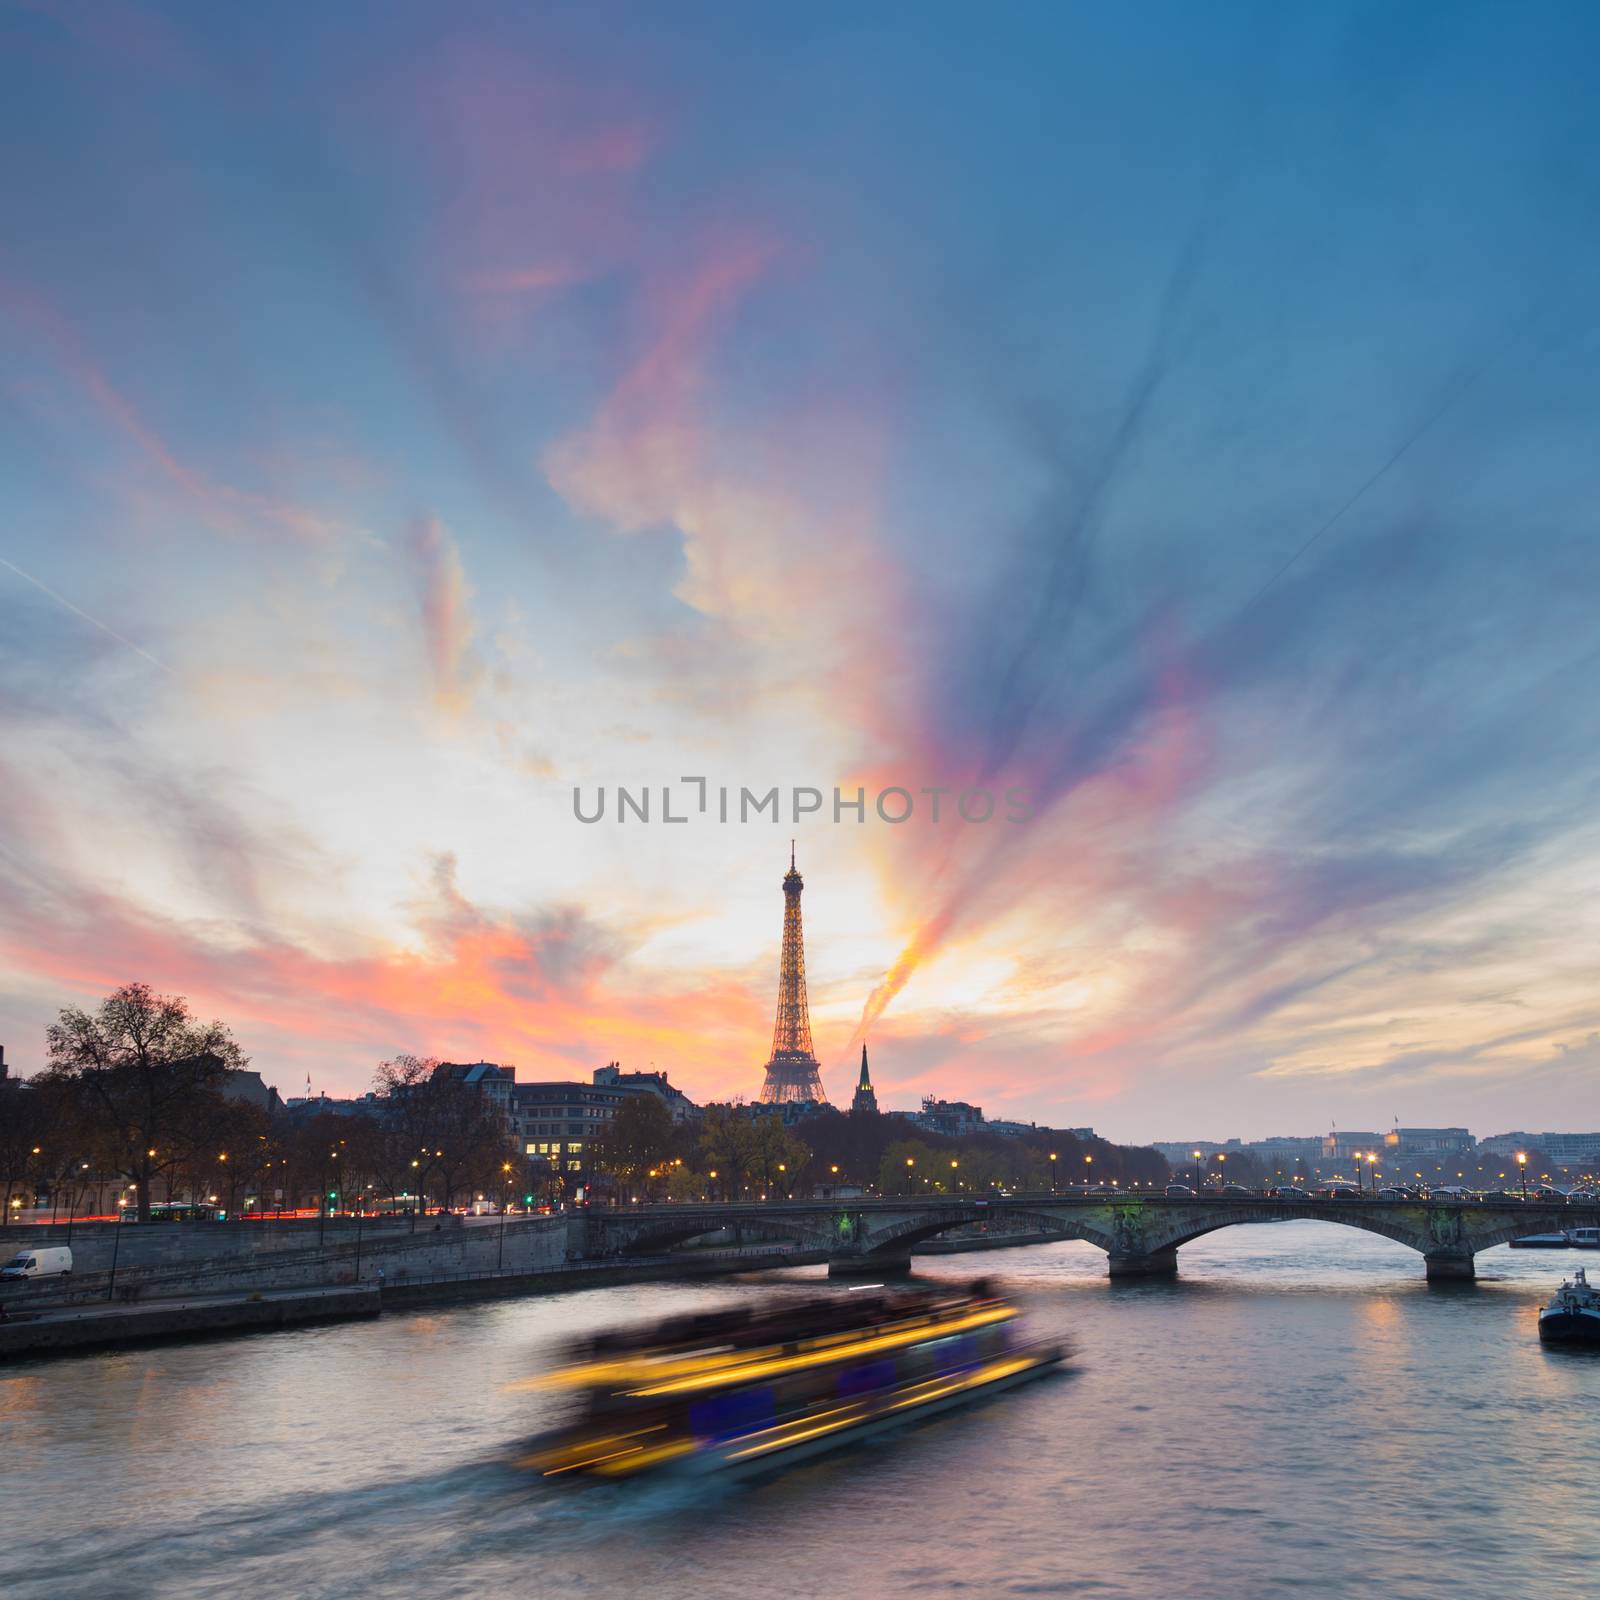 Sunset over Eiffel Tower and Seine river. by kasto